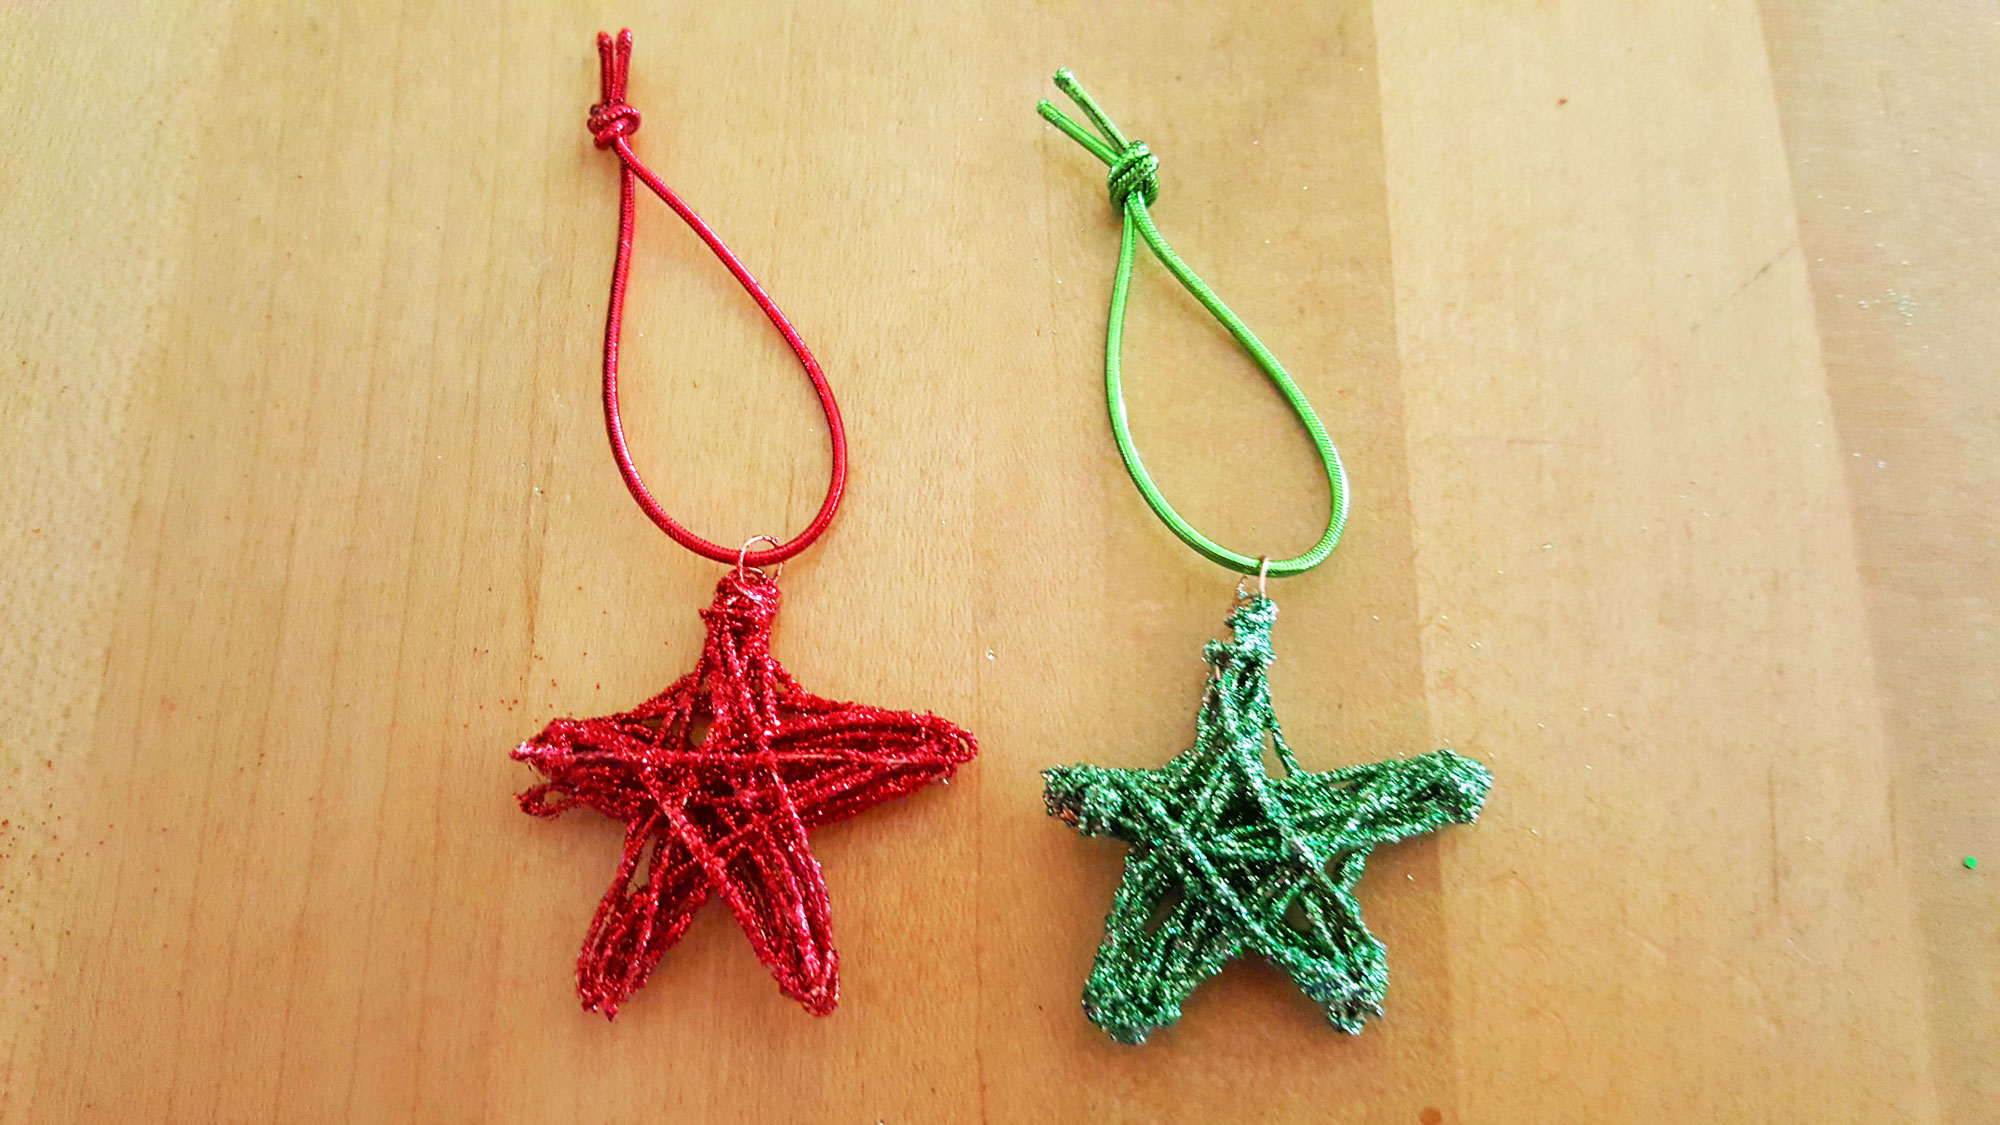 A red and green DIY star ornament side by side on a counter | OrnamentShop.com